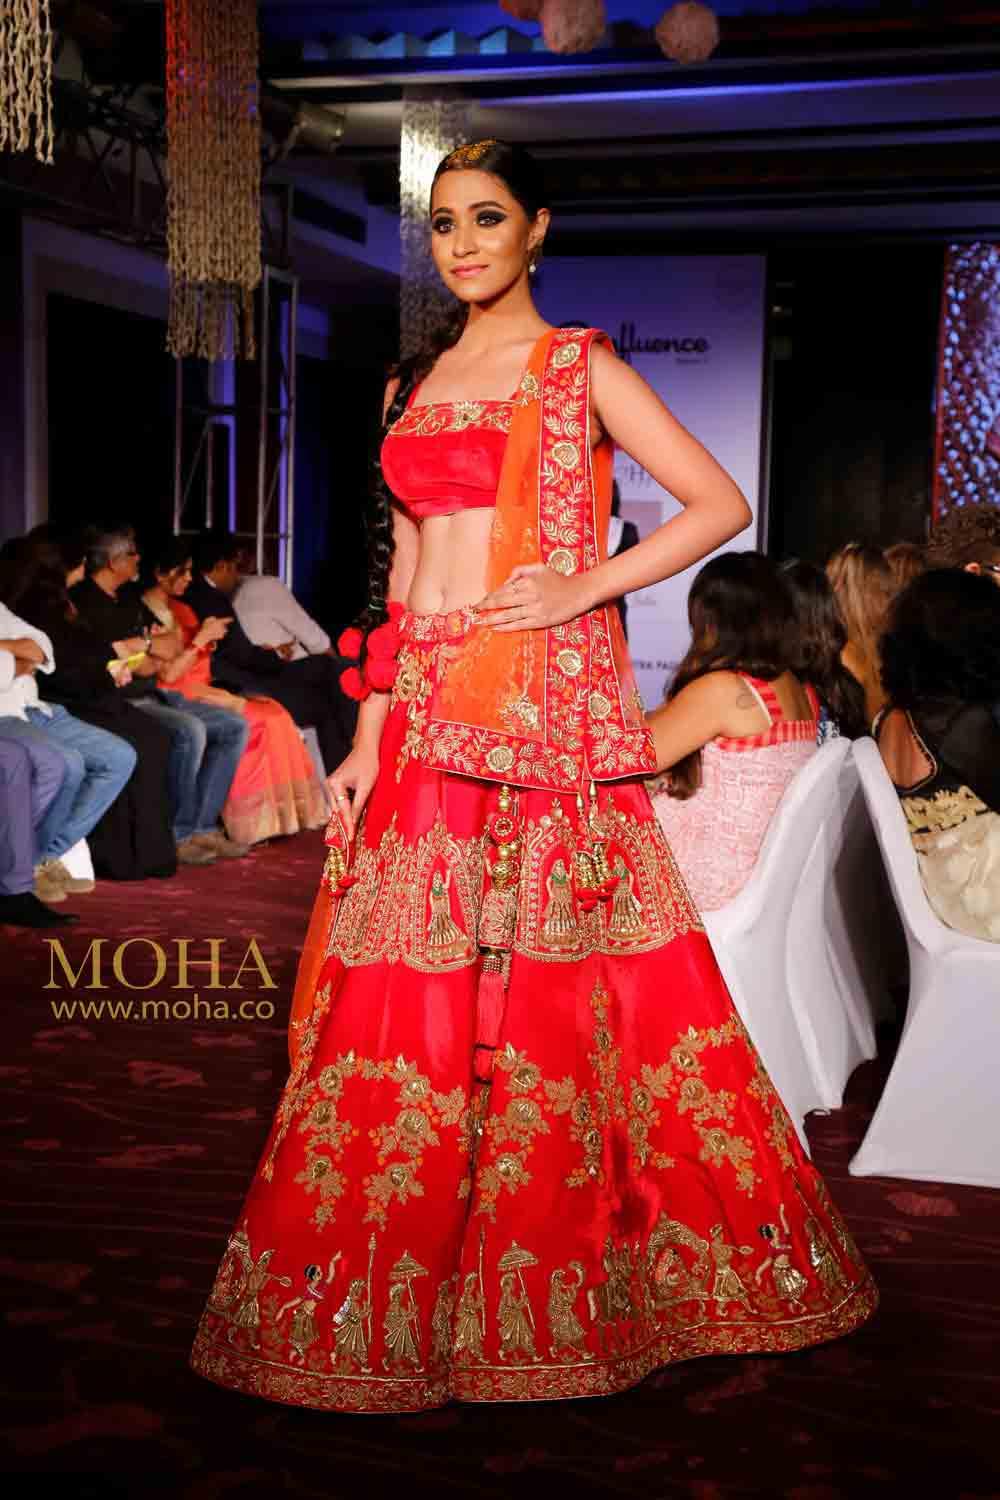 Moha Atelier: A Couture Store For Handcrafted Designer Bridal Wear